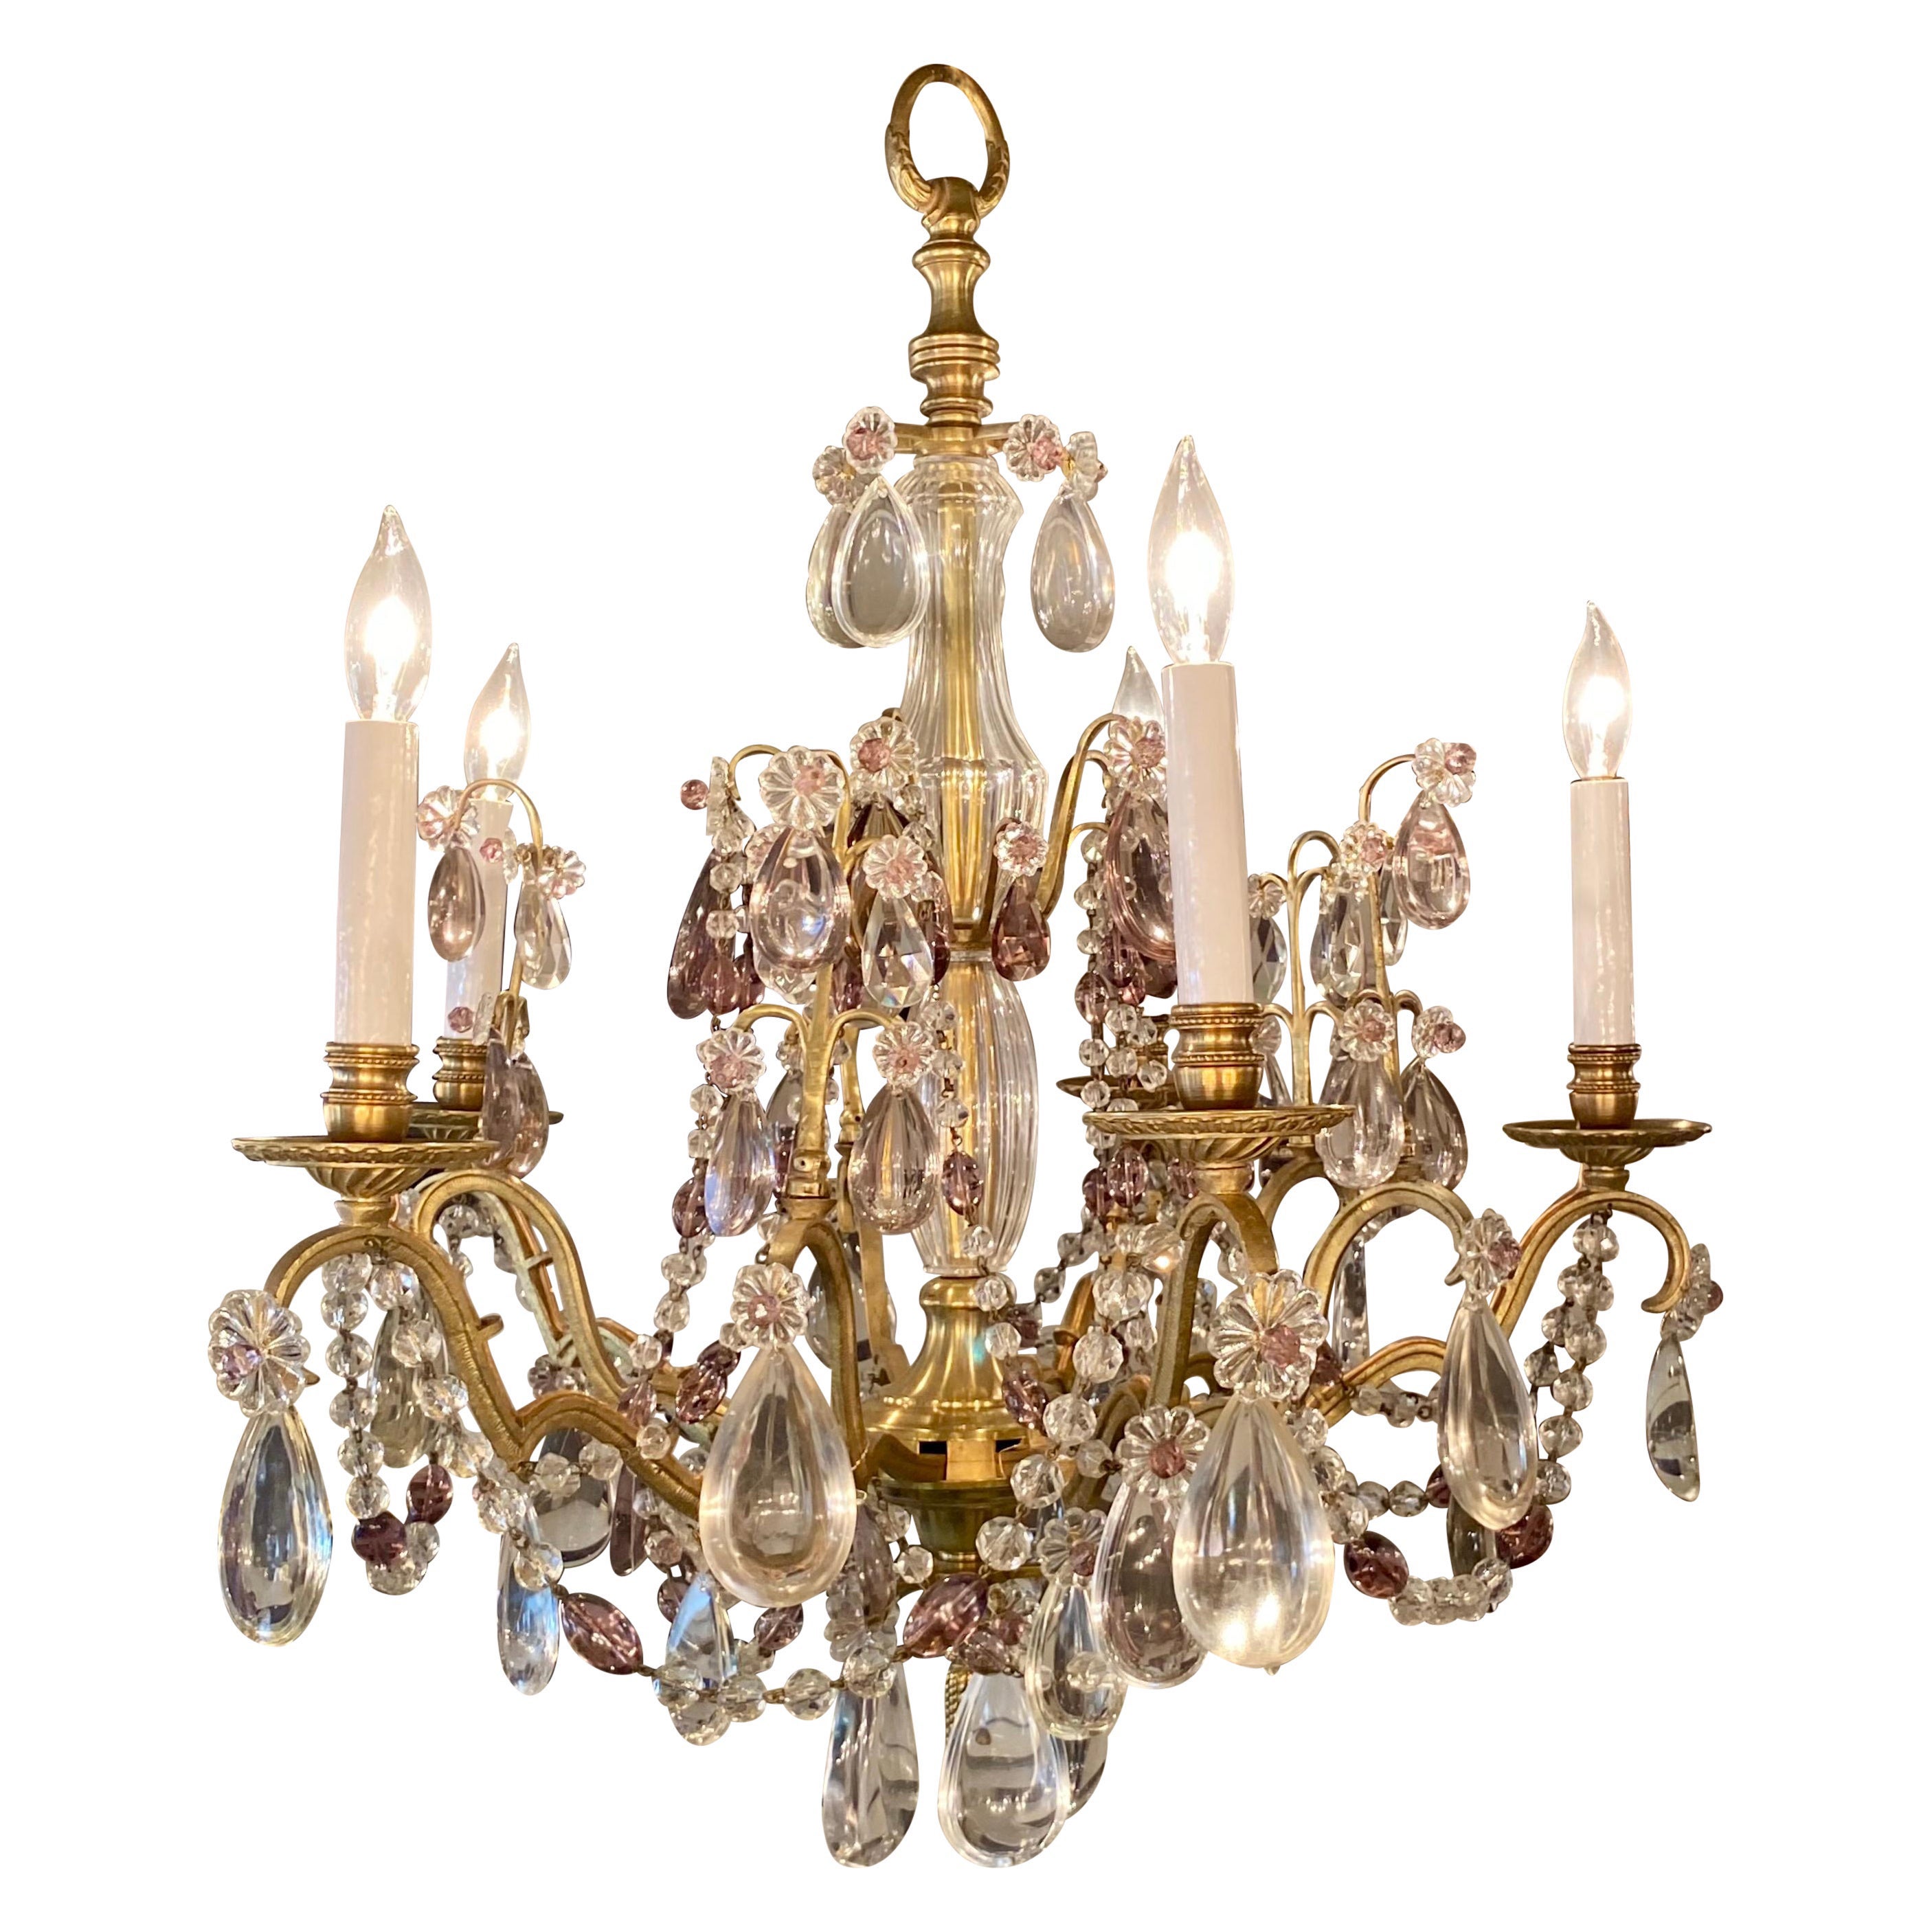 Antique French Gold Bronze and Baccarat Crystal Chandelier, circa 1890